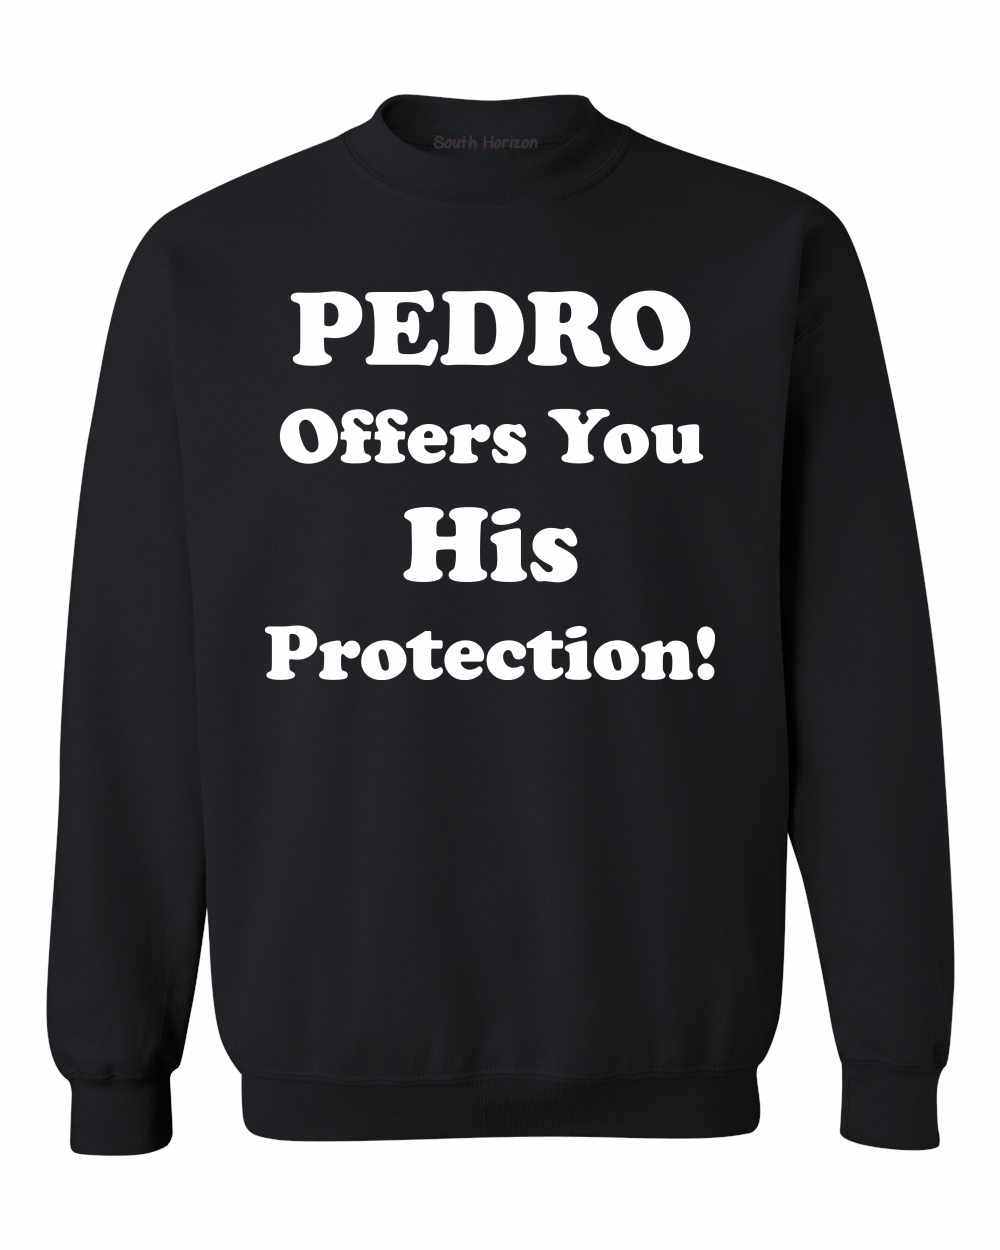 PEDRO OFFERS YOU HIS PROTECTION on SweatShirt